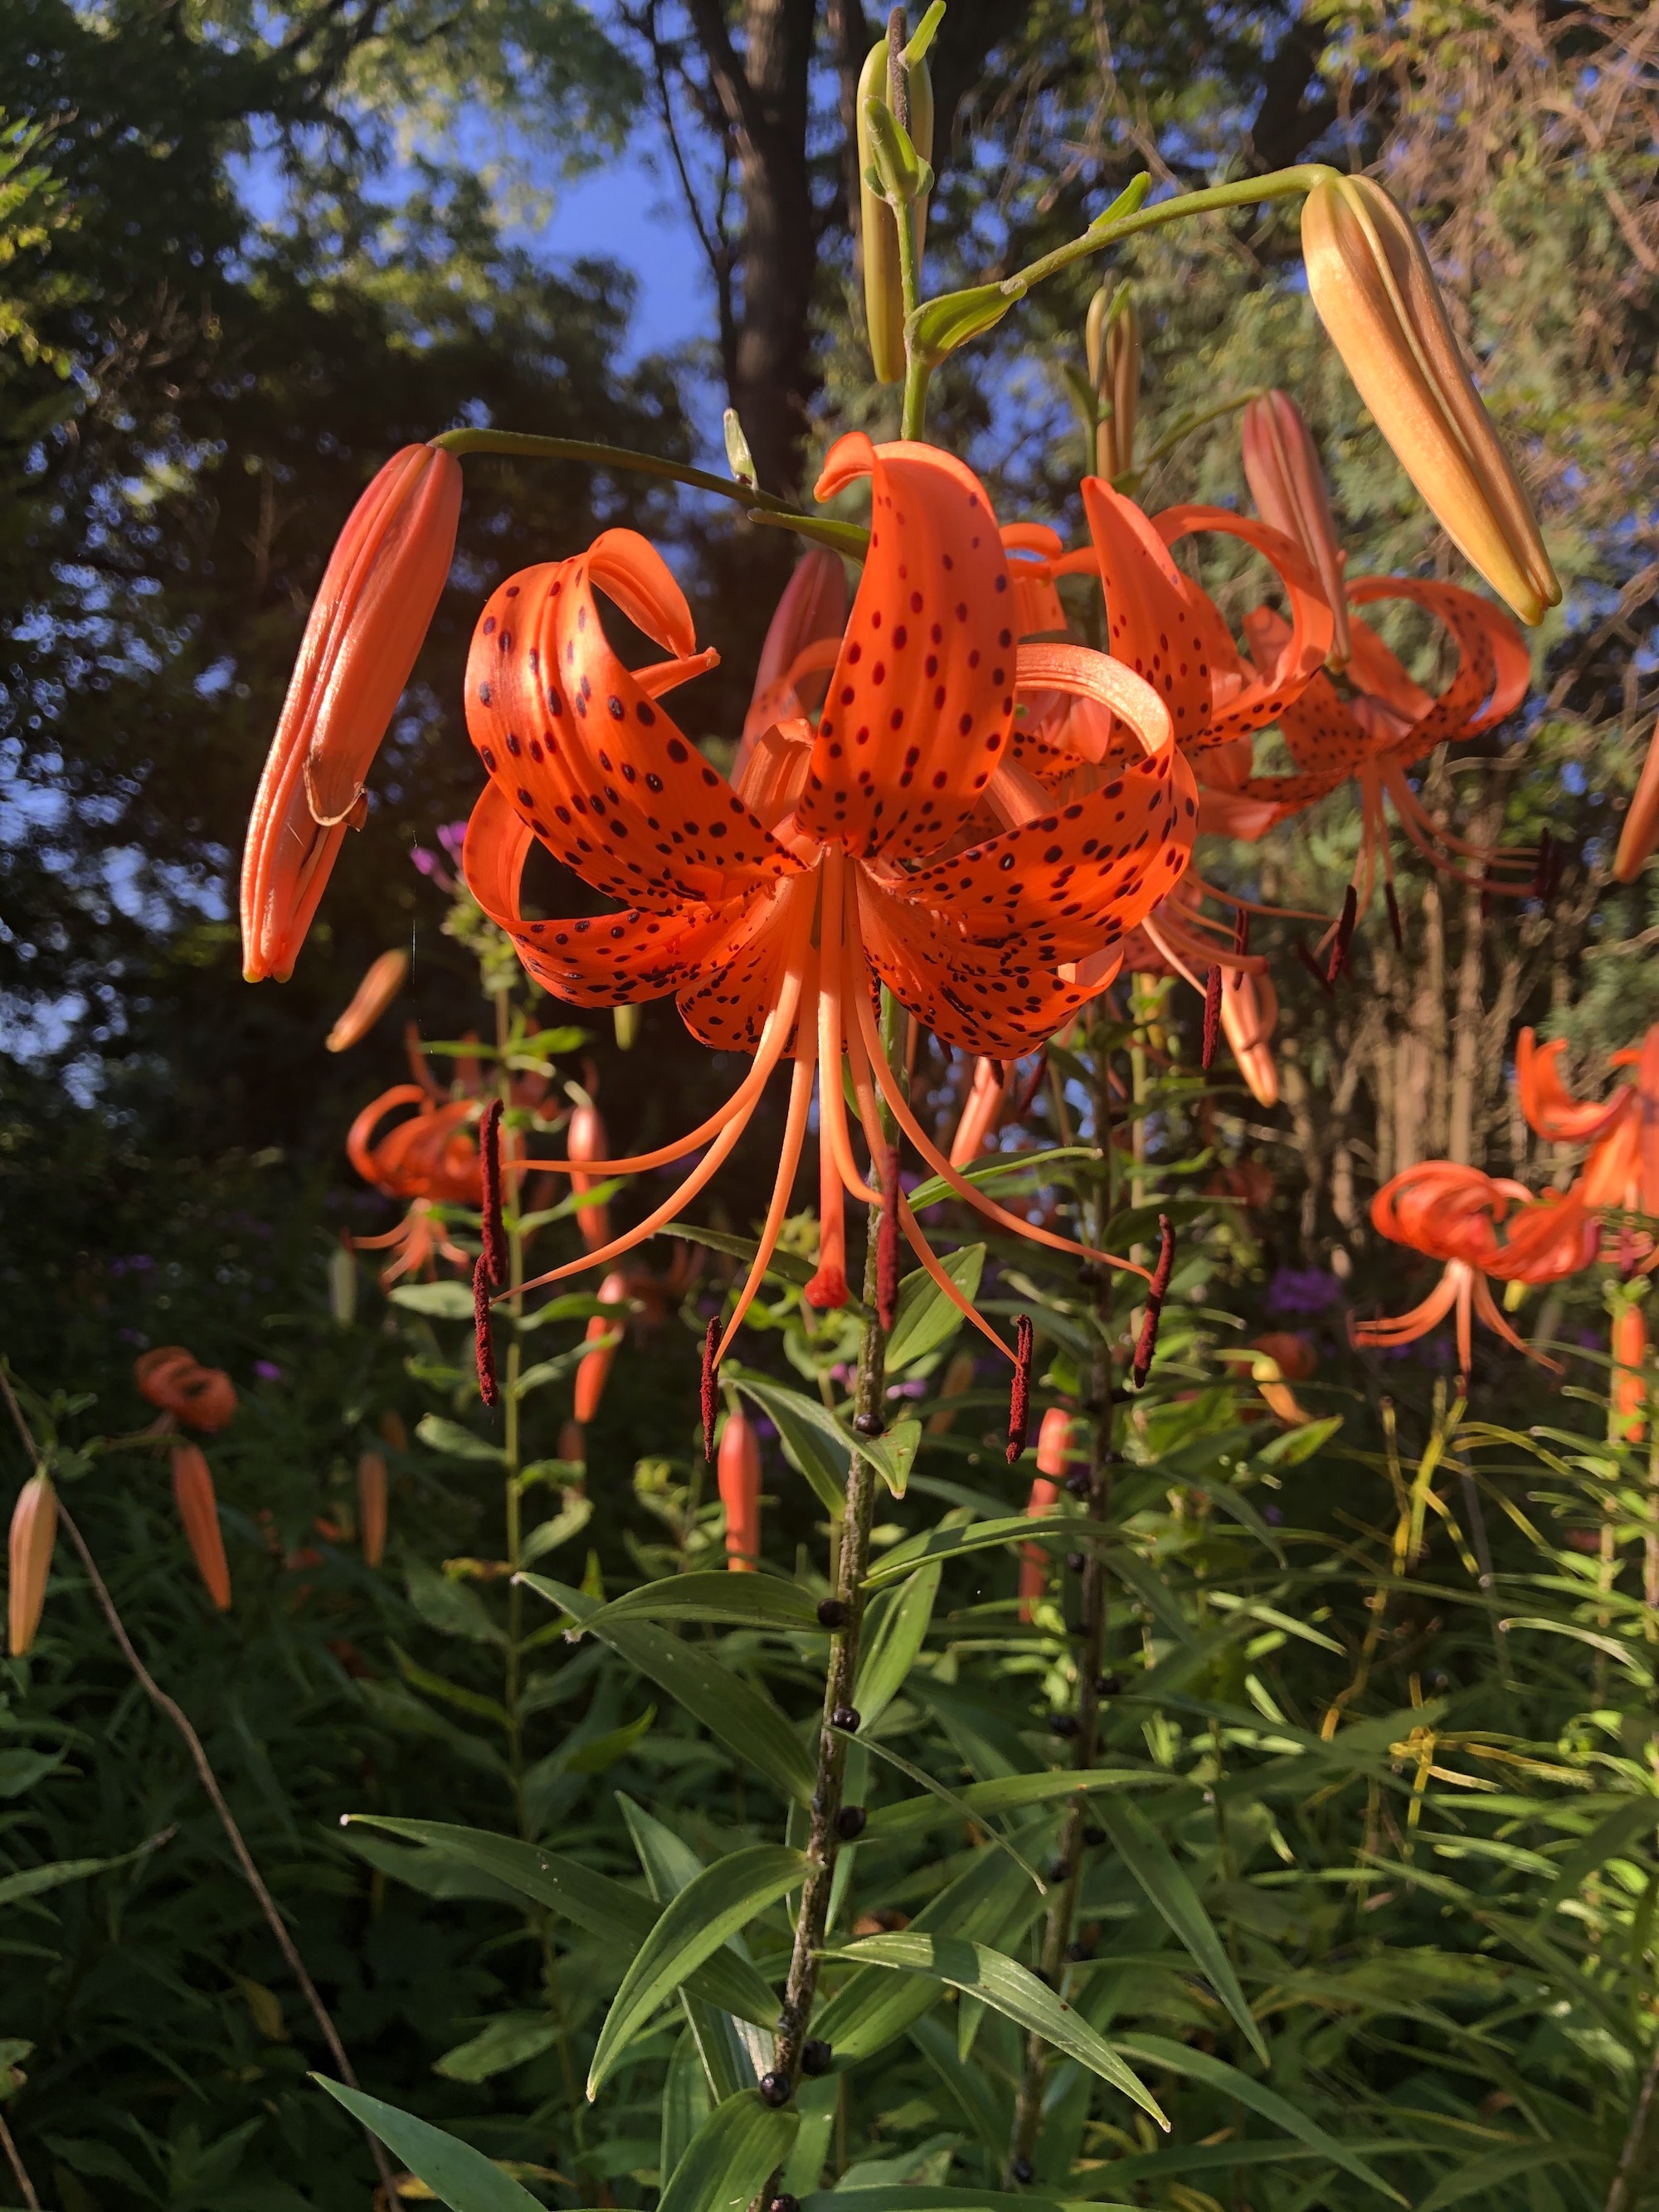 Tiger Lily near the Duck Pond on July 24, 2020.